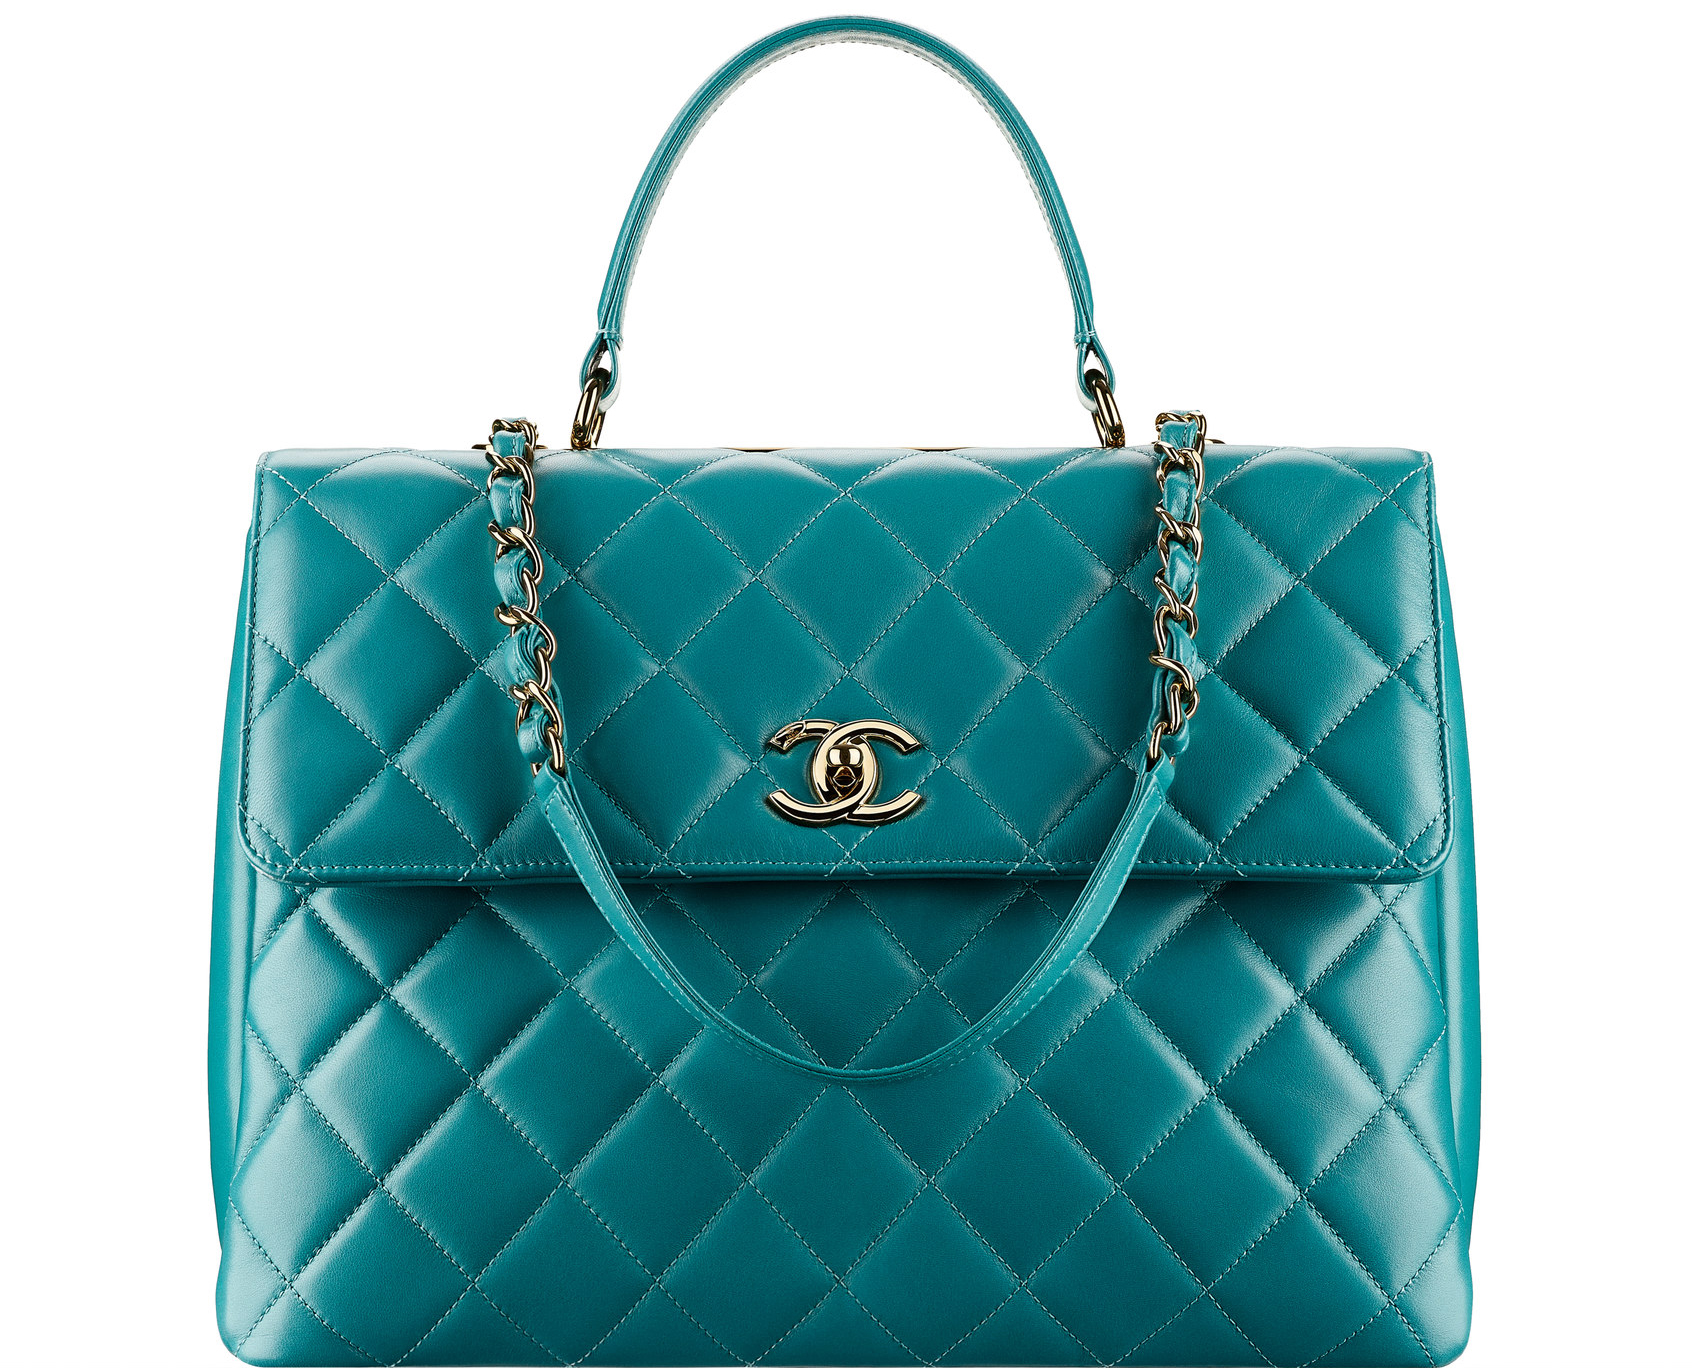 Teal Chanel quilted lambskin flap bag